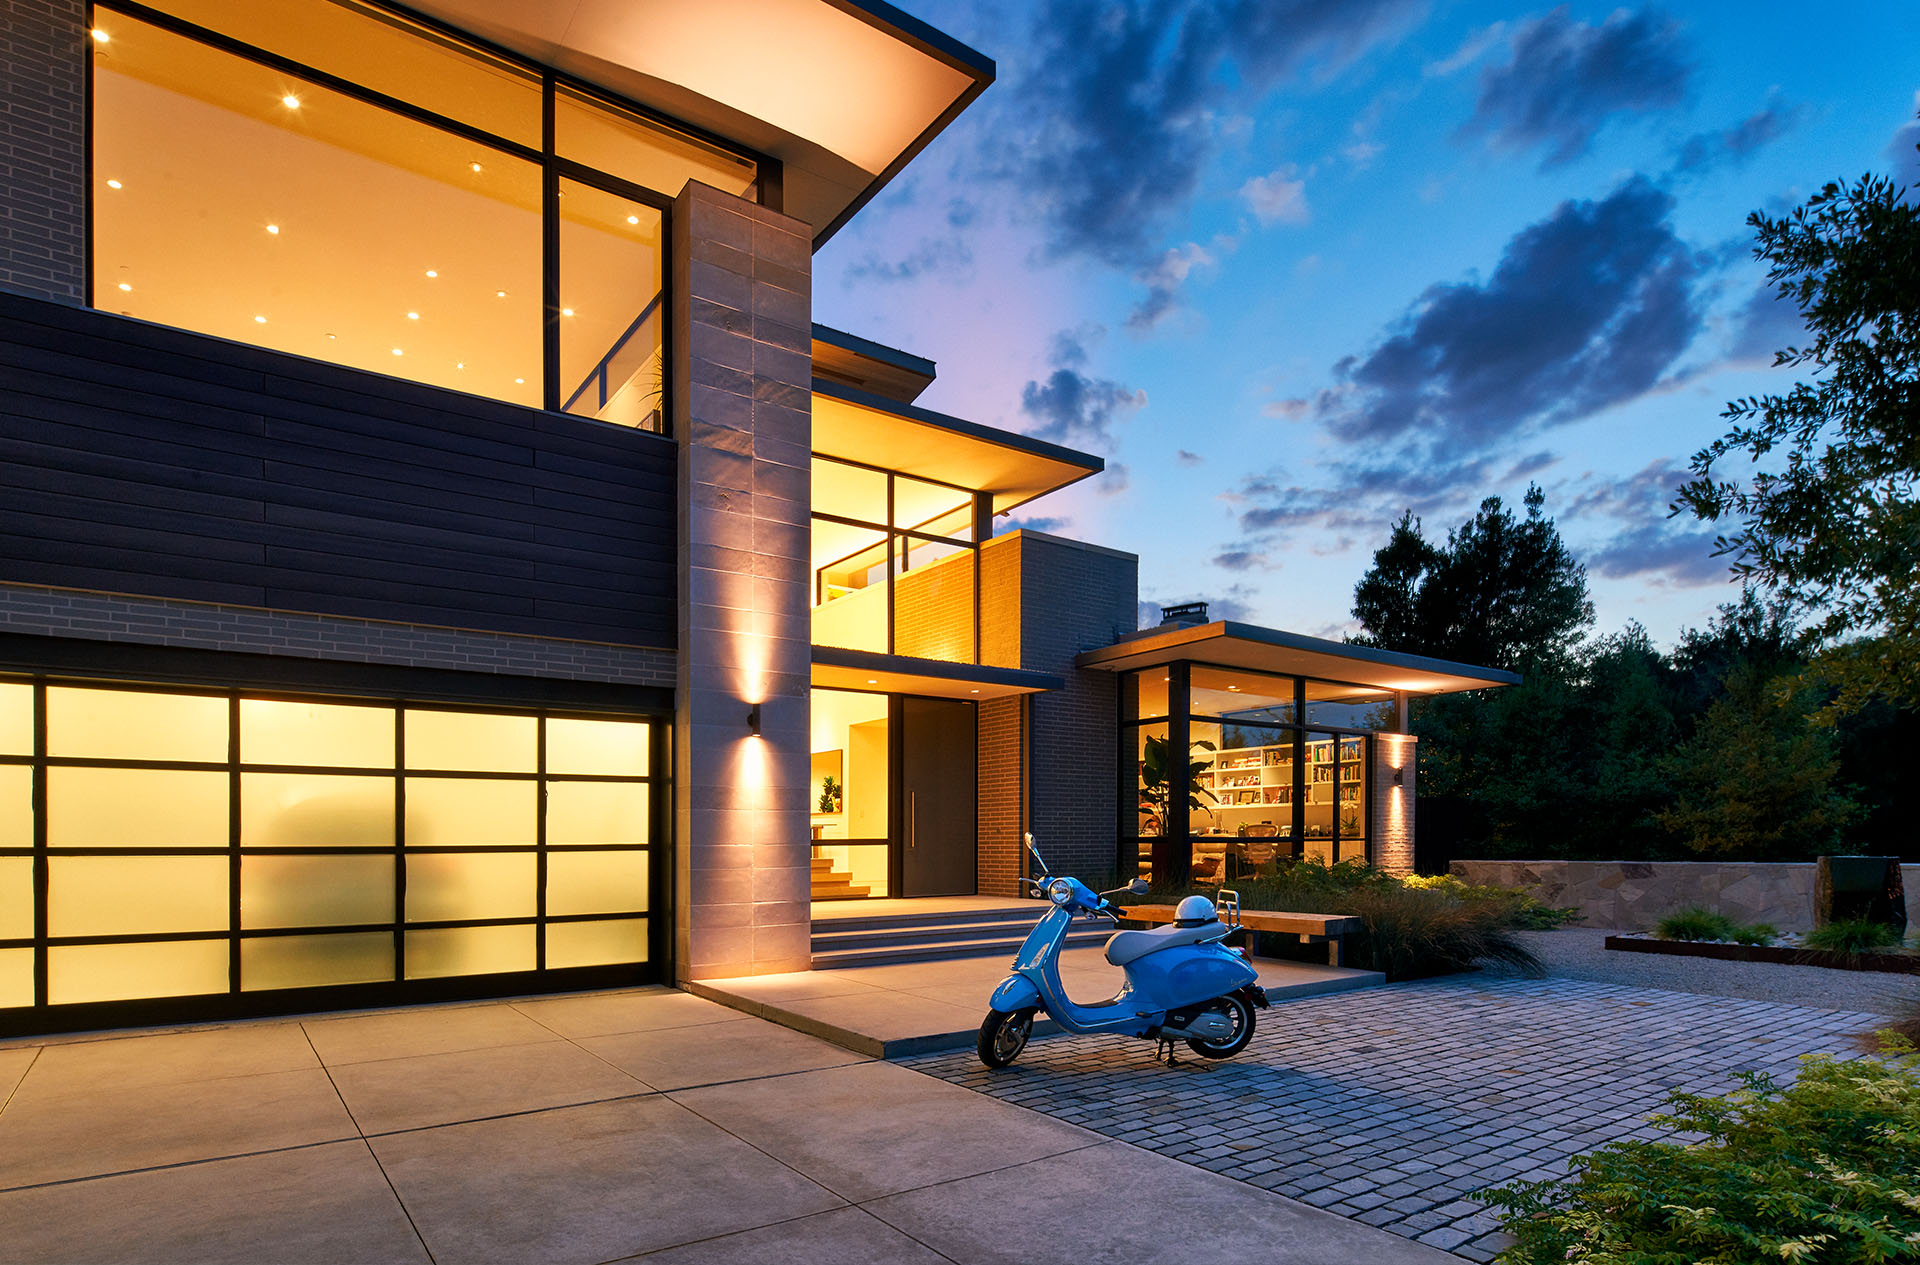 A Bernbaum/Magadini Architects contemporary home featured in a Dallas Architecture Forum Tour showcasing the front exterior with ample floor-to-ceiling windows allowing the outside in.